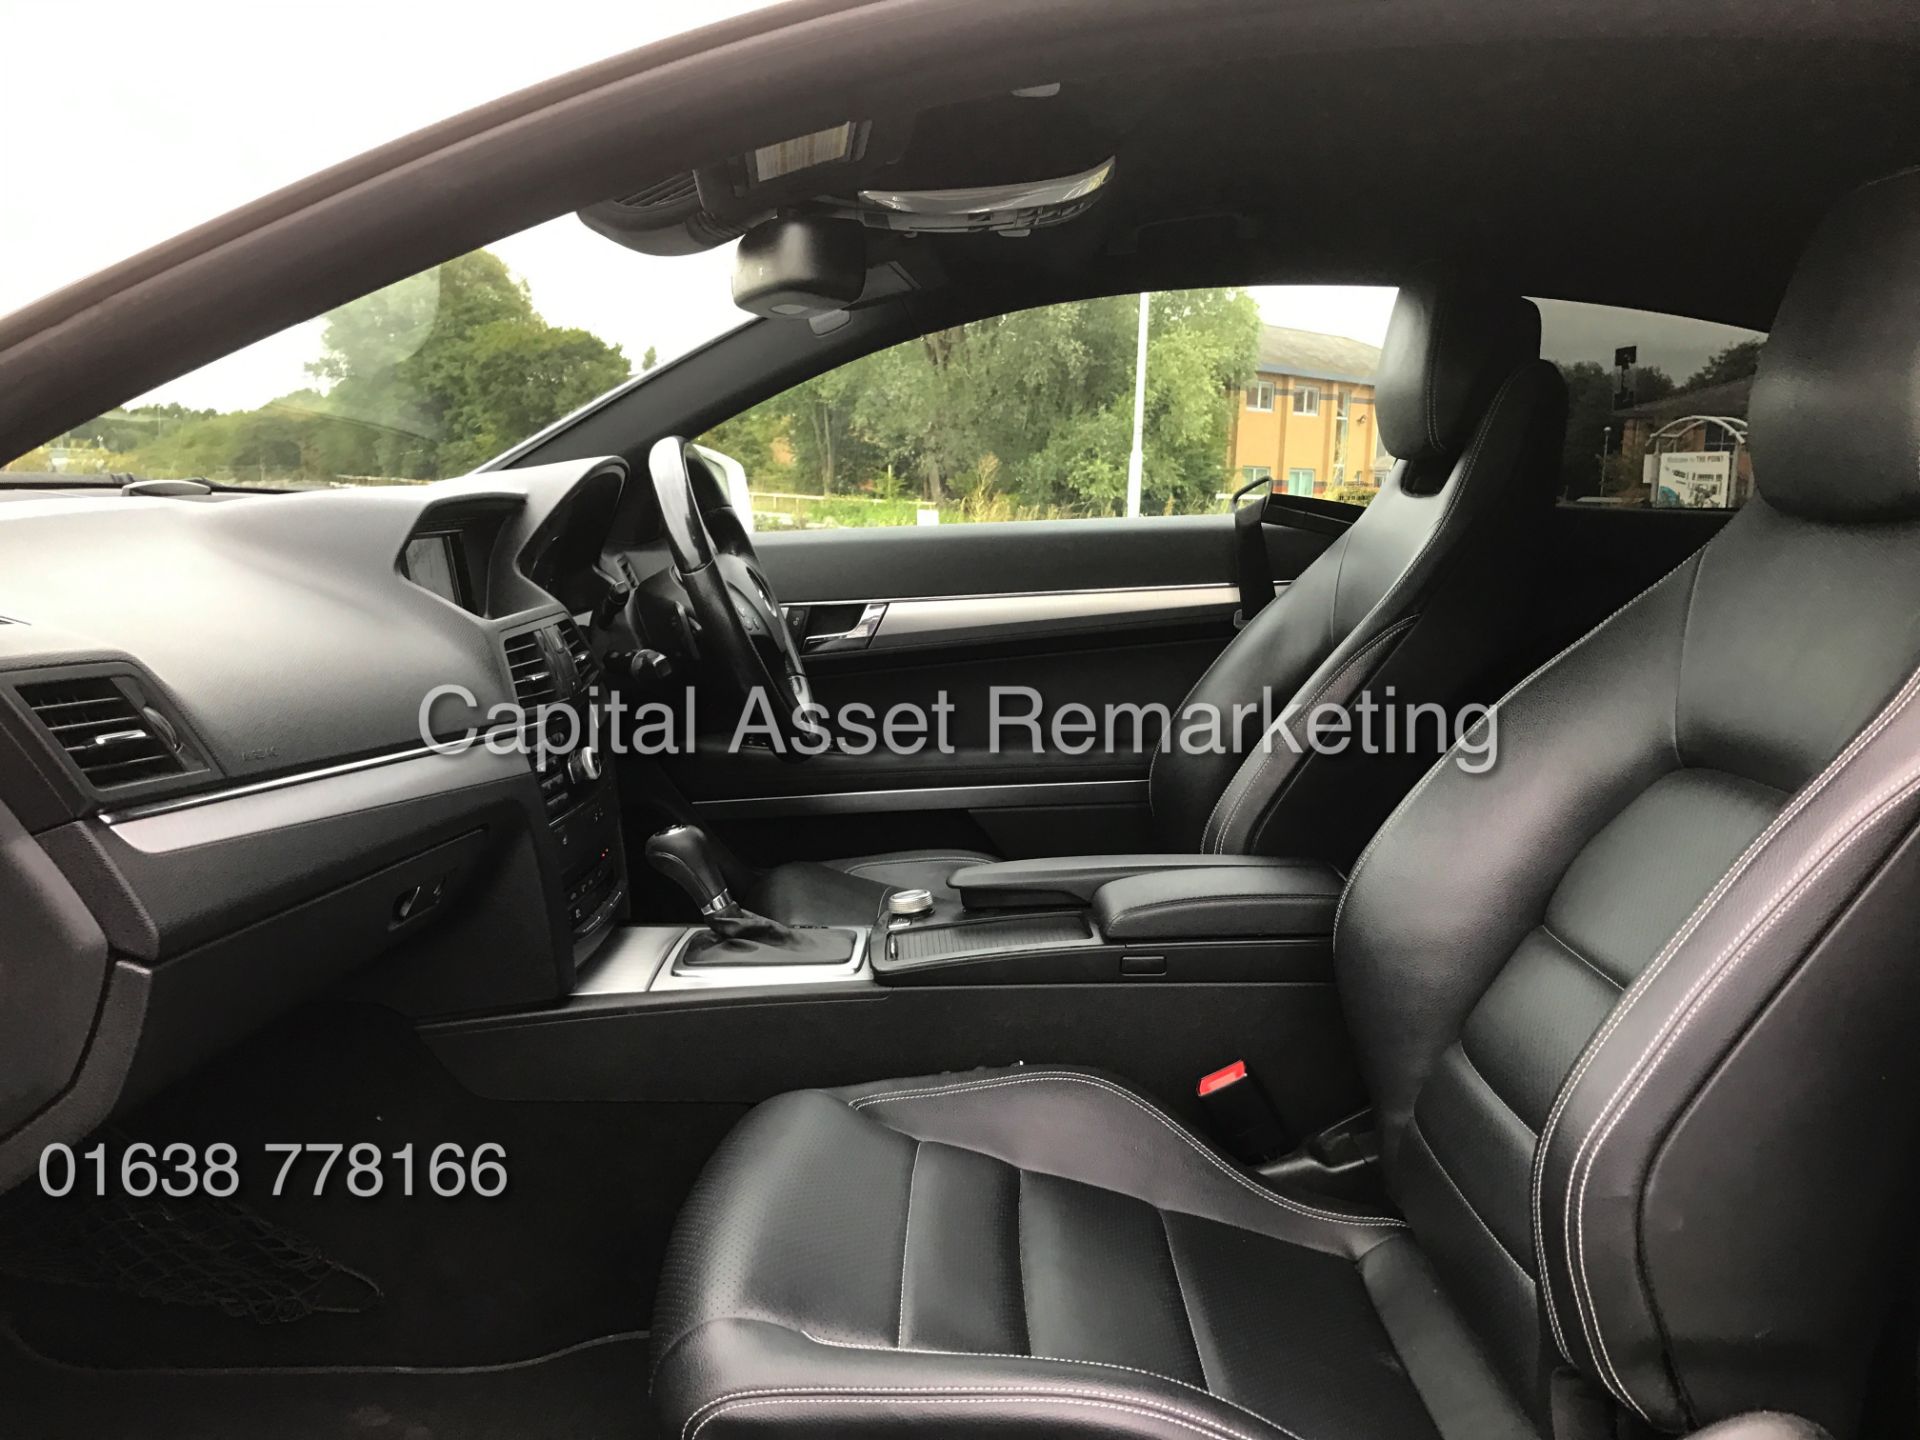 MERCEDES E350CDI 7G TRONIC "AMG SPORT" COUPE (10 REG) SAT NAV - LEATHER - AMG PACK - FULLY LOADED ! - Image 14 of 25